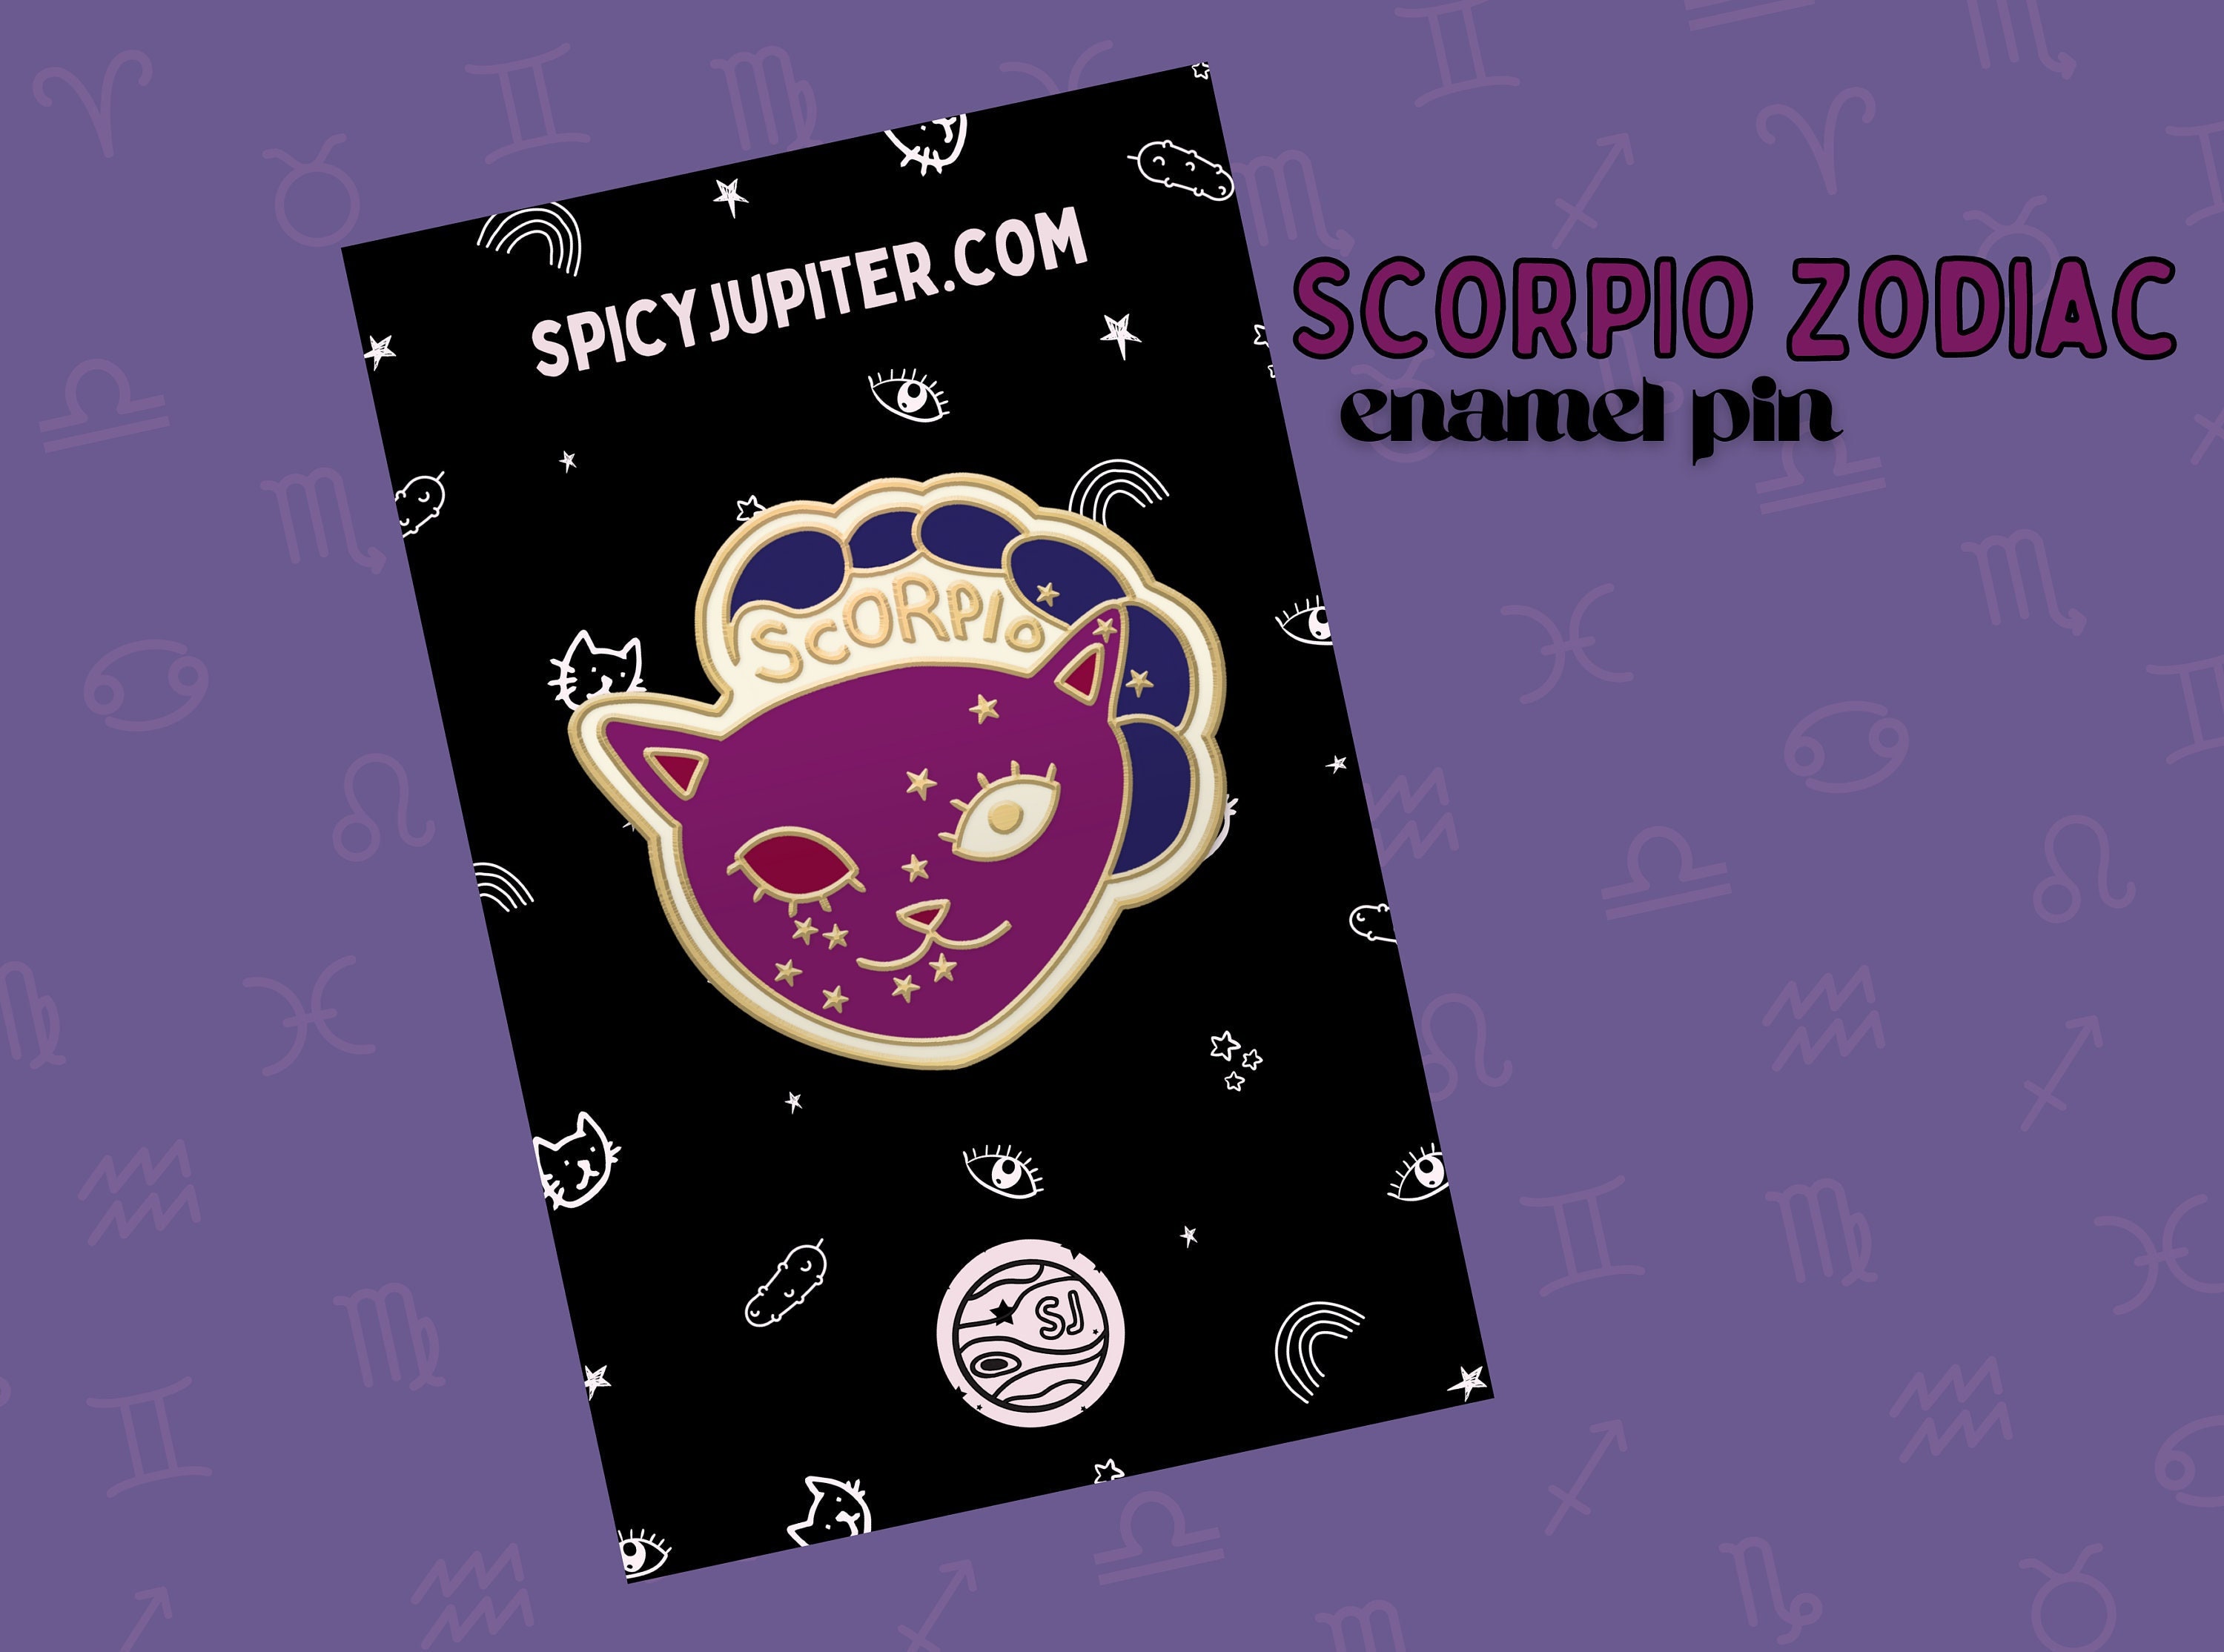 Scorpio Zodiac Cat Enamel Pin, Star Sign Brooch, Gifts for Scorpios, Cute  Kitty Pin, Scorpio Astrology Gold Plated Badge 